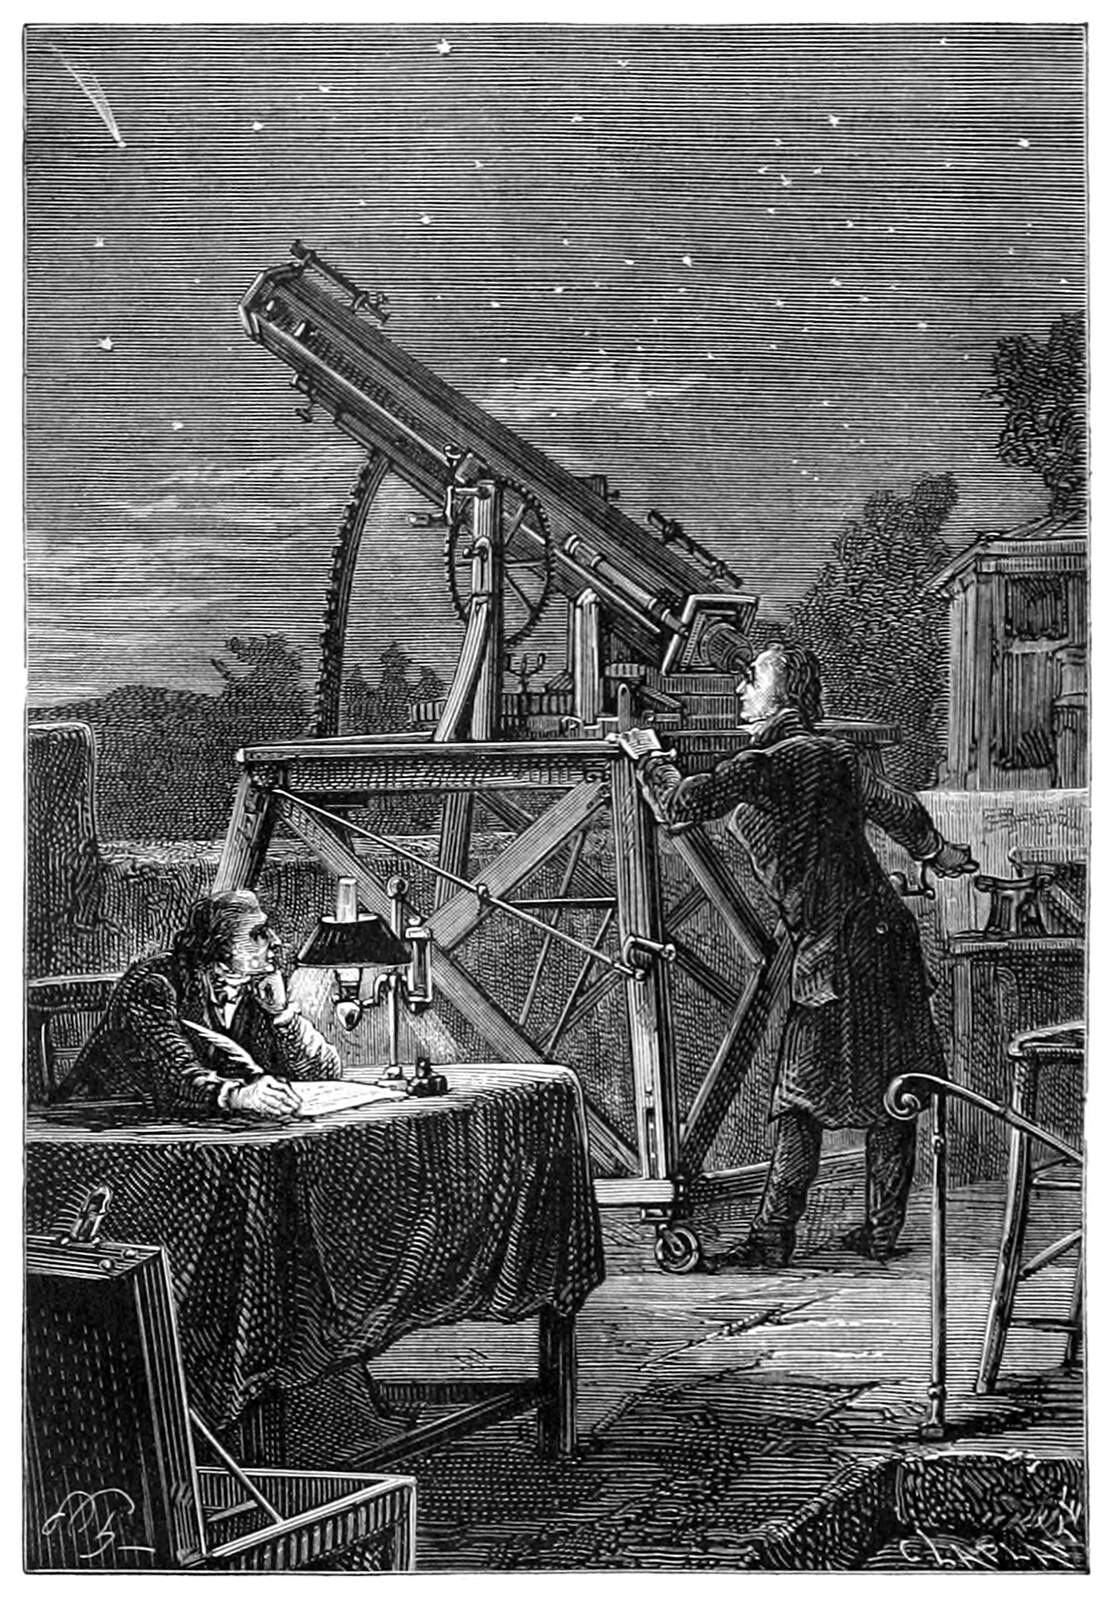 An astronomer looks up at the stars